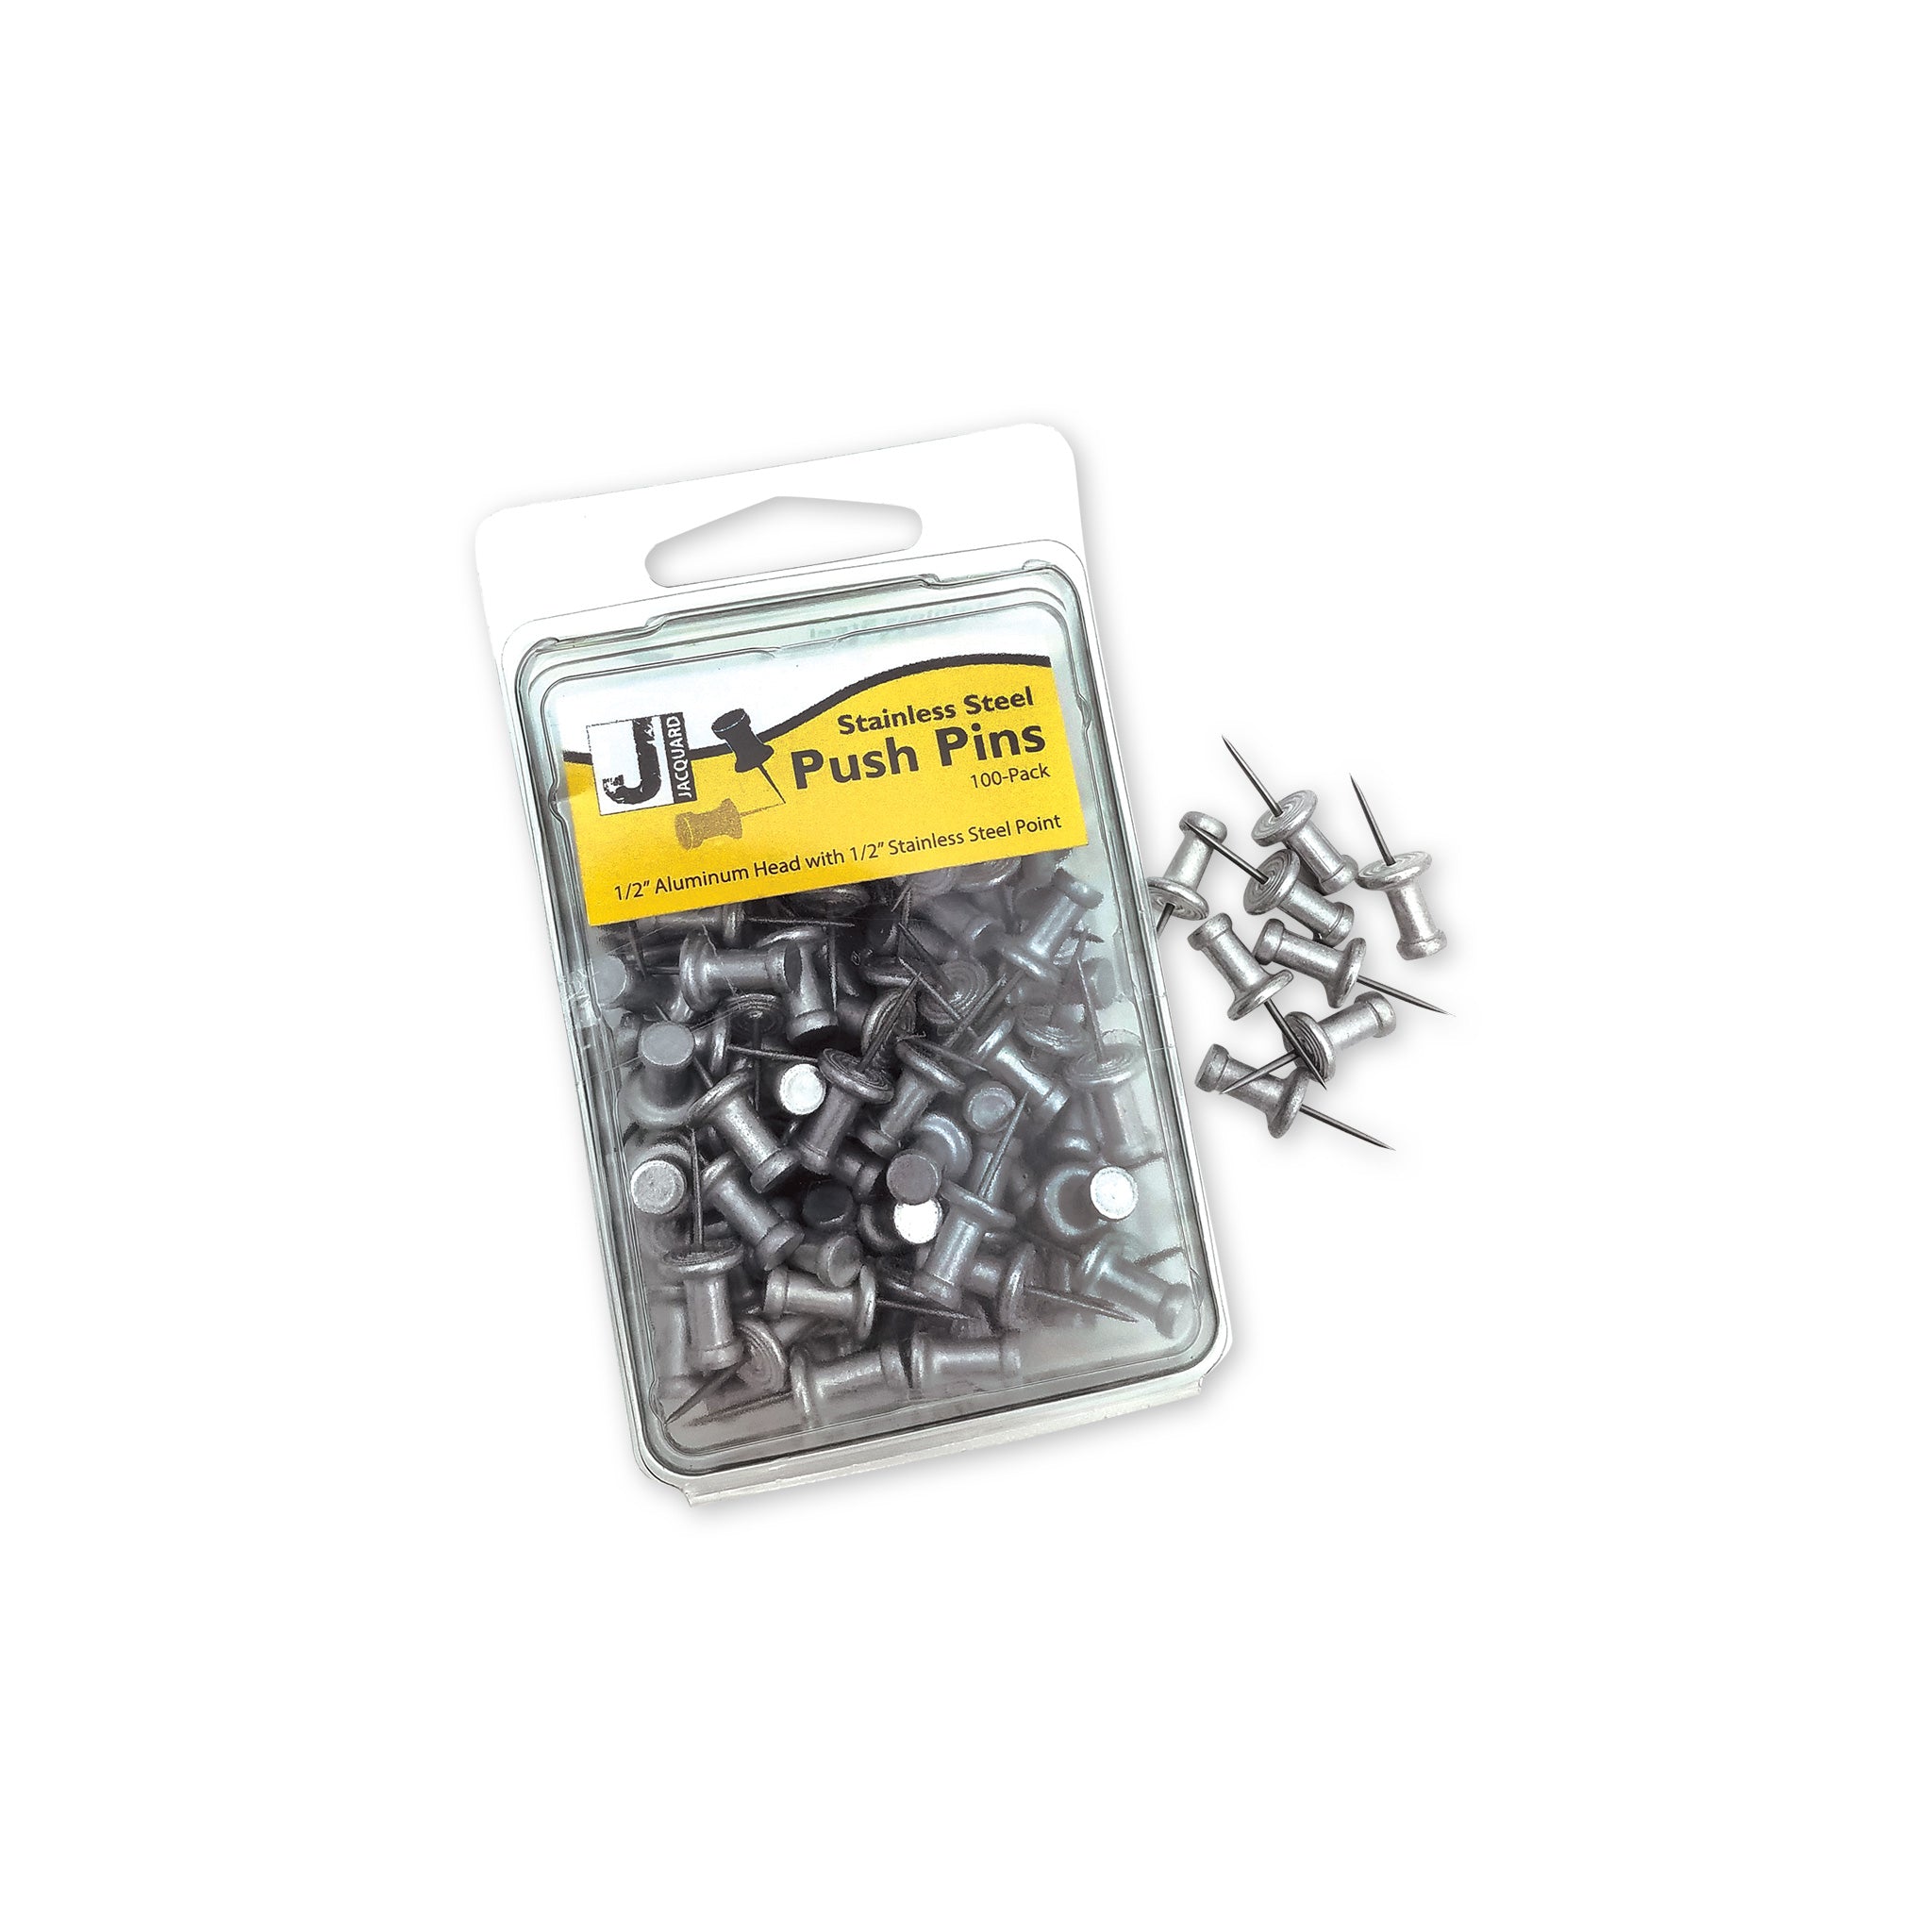 Stainless Steel Push Pins